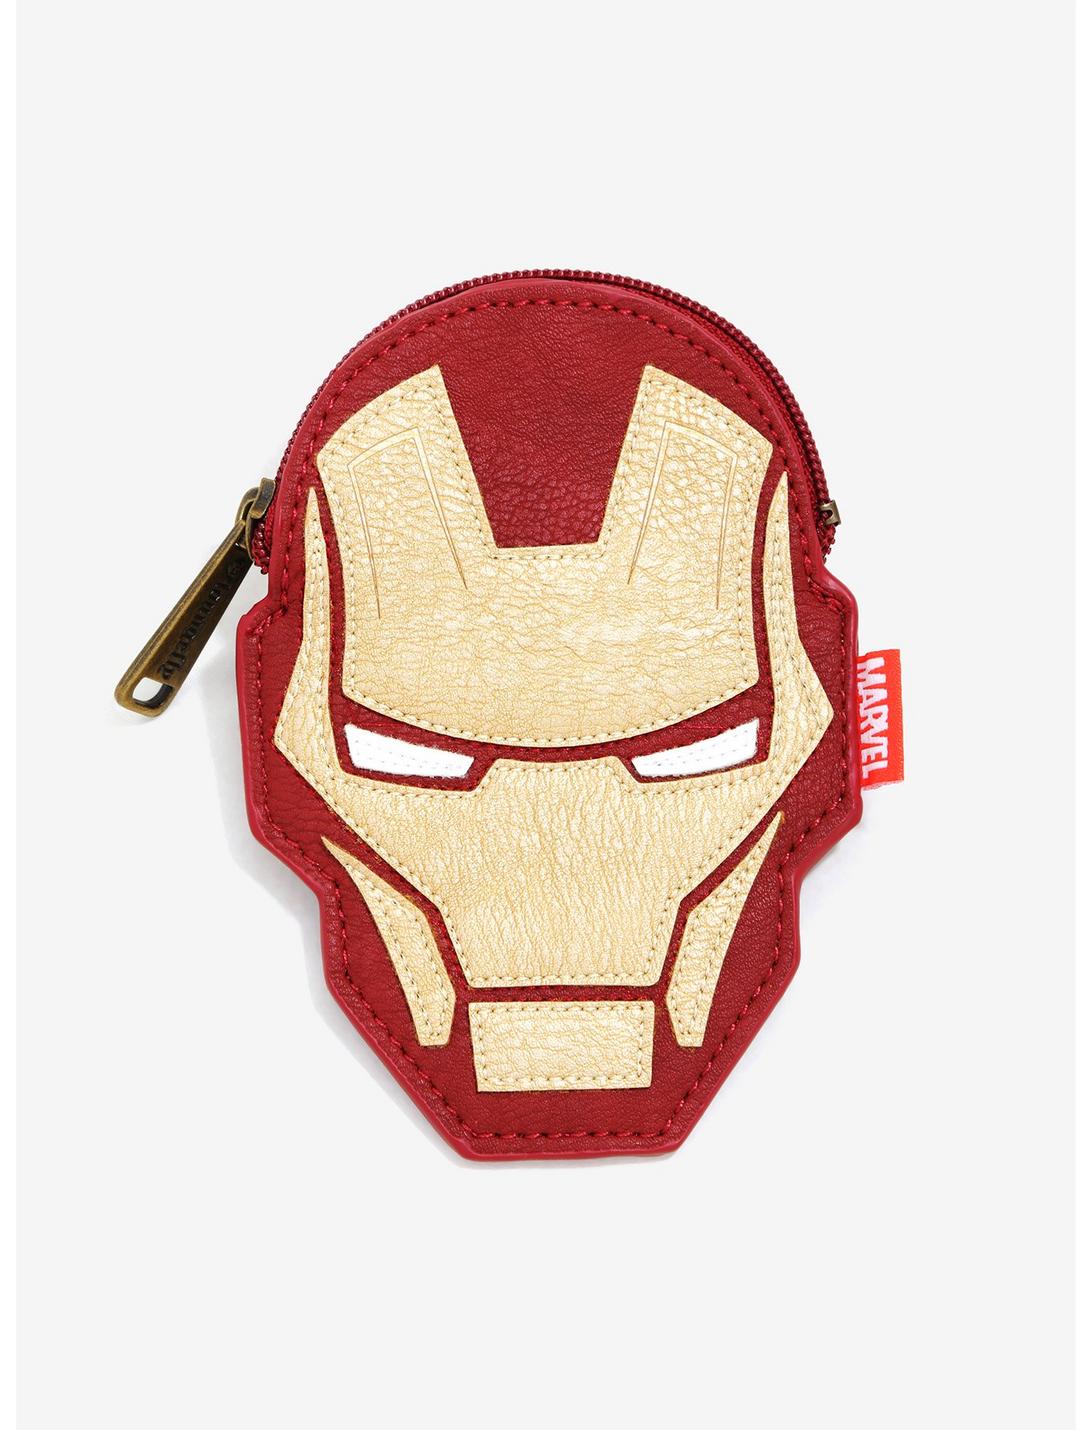 Loungefly Iron Man Coin Purse, , hi-res